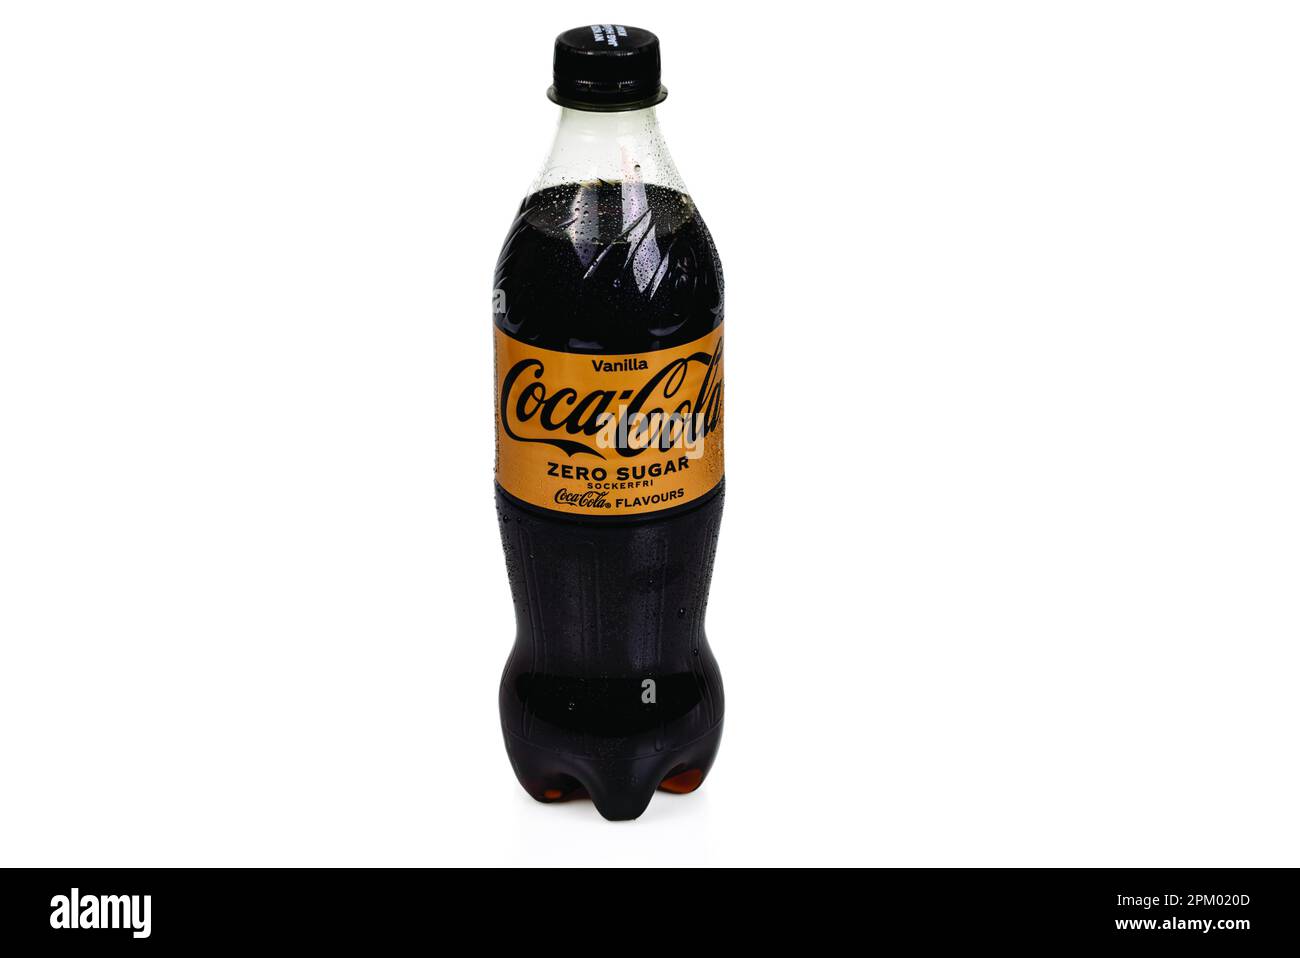 https://c8.alamy.com/comp/2PM020D/close-up-view-of-cold-plastic-sugar-free-bottle-with-vanilla-coca-cola-isolated-on-white-background-2PM020D.jpg